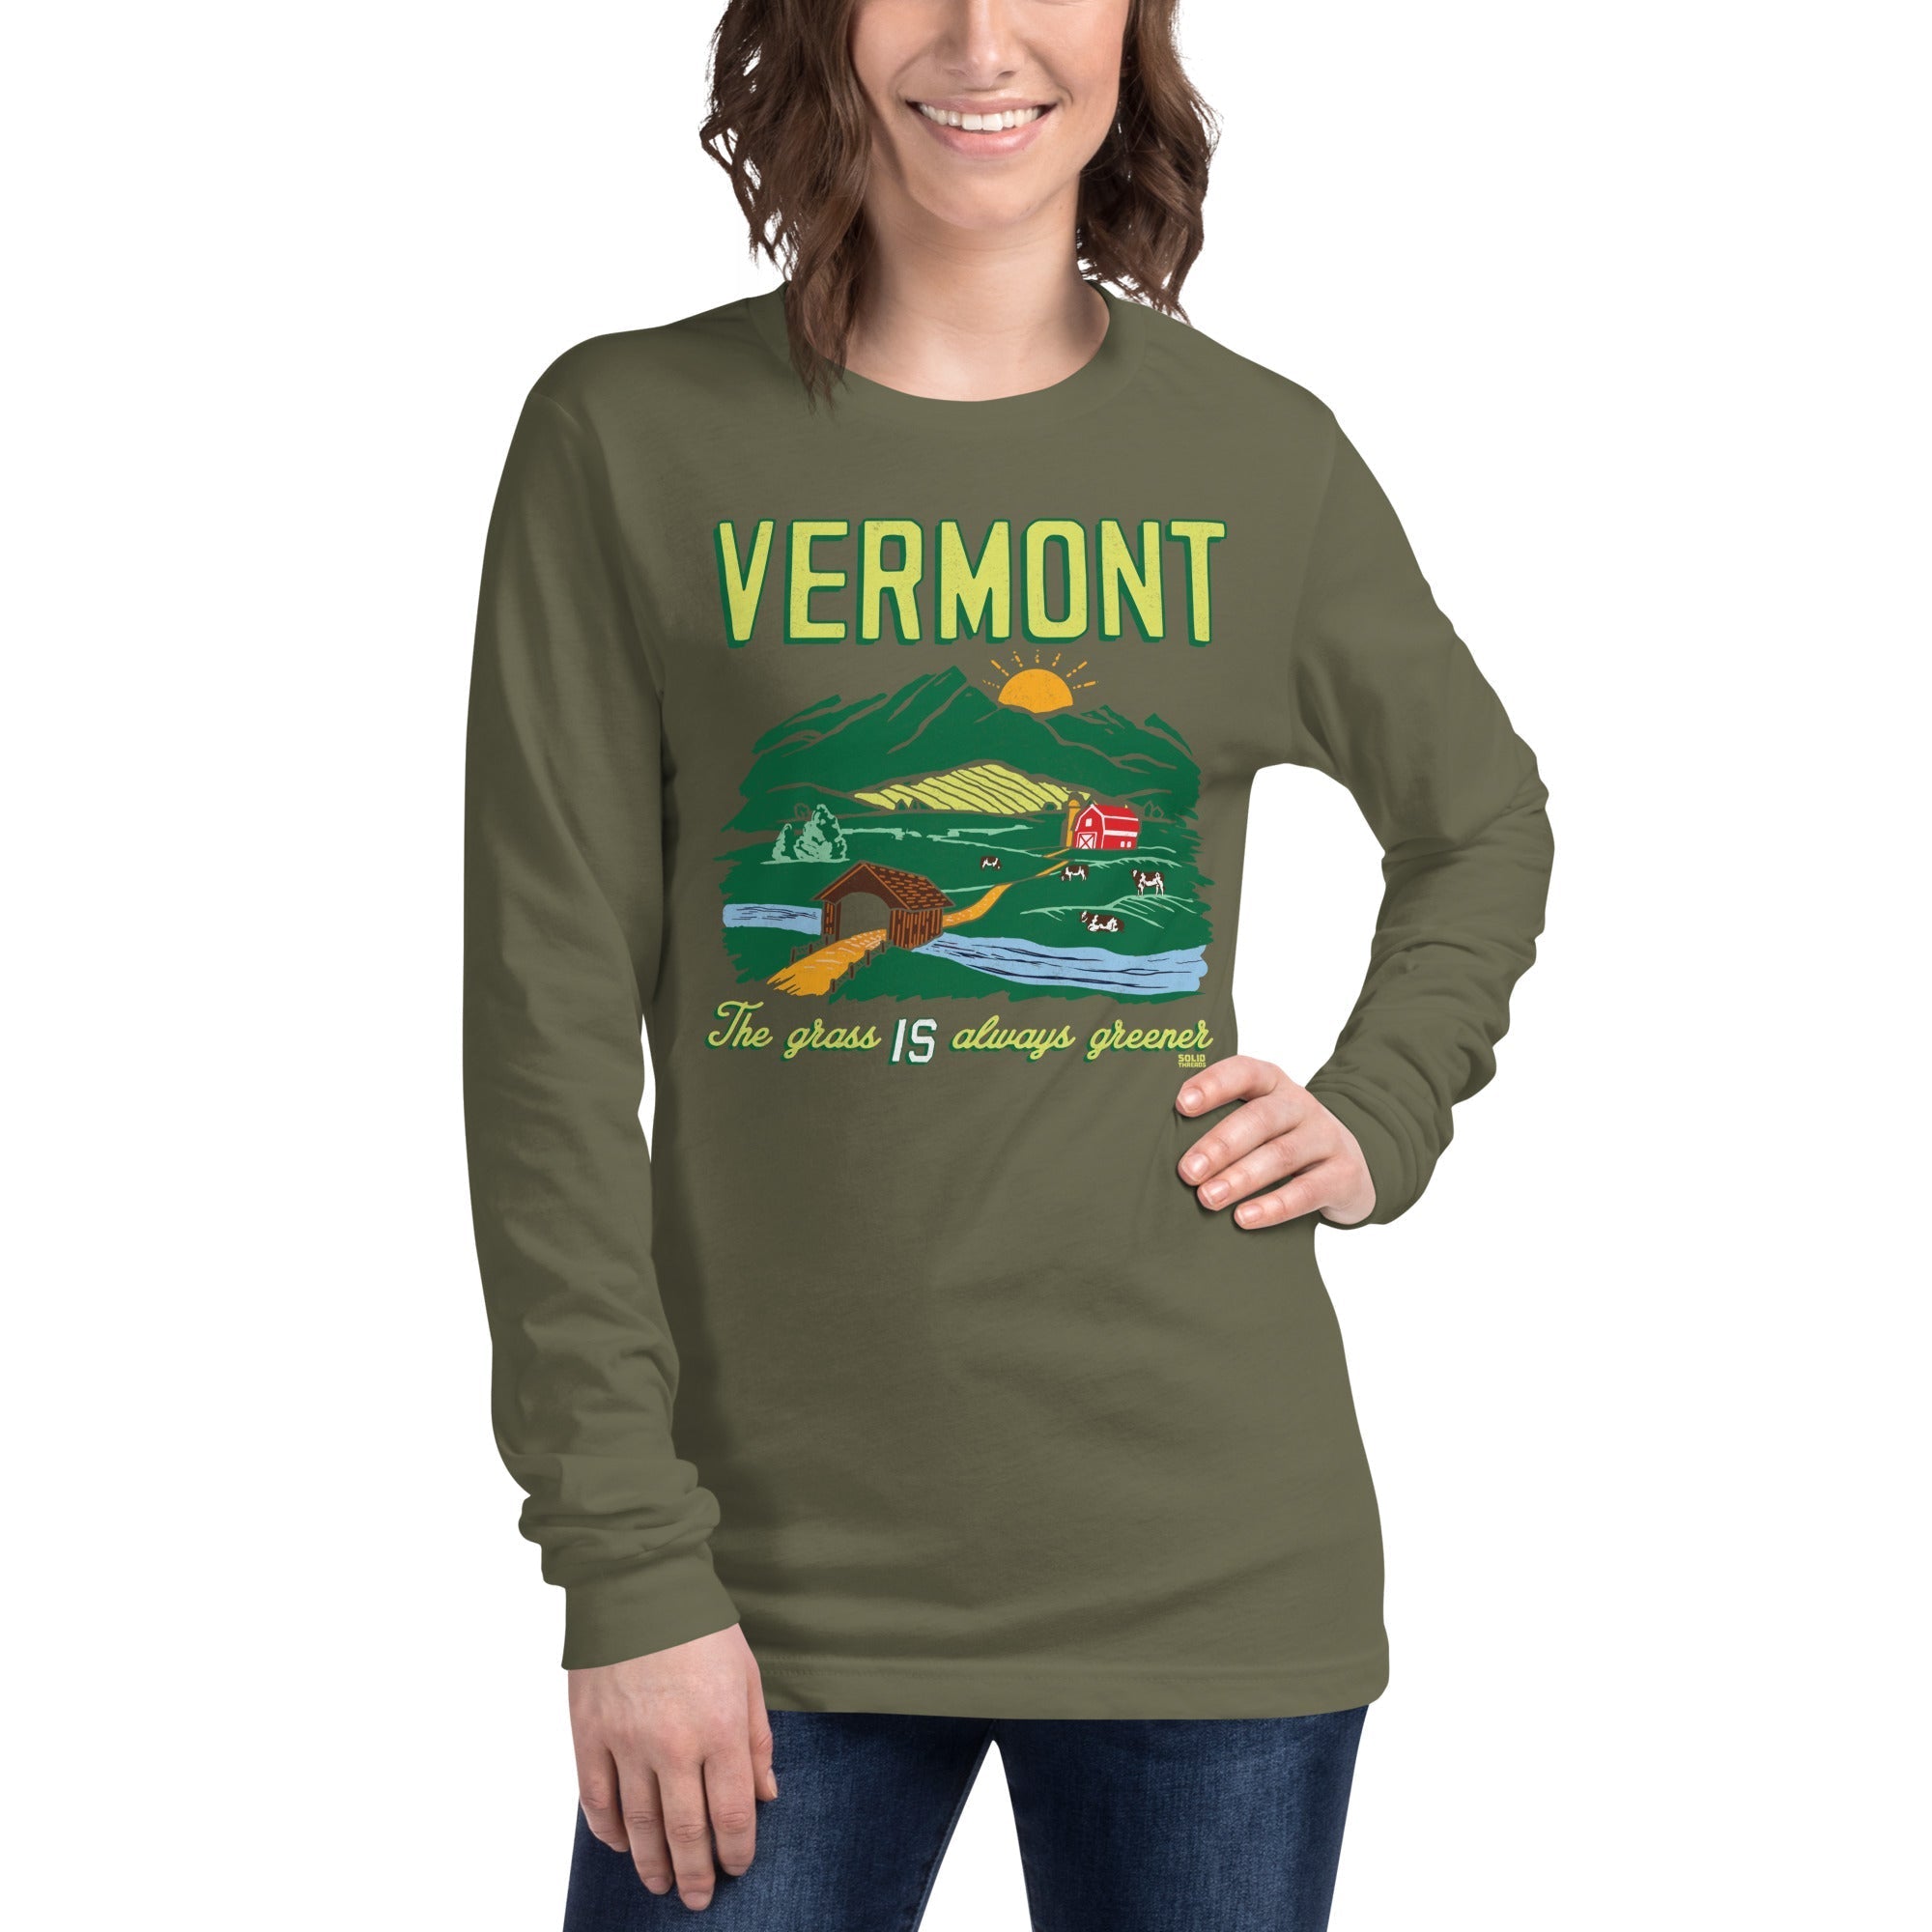 Unisex Vermont The Grass Is Always Greener Cool Long Sleeve T Shirt | Vintage Green Mountains Graphic Tee on Model | Solid Threads